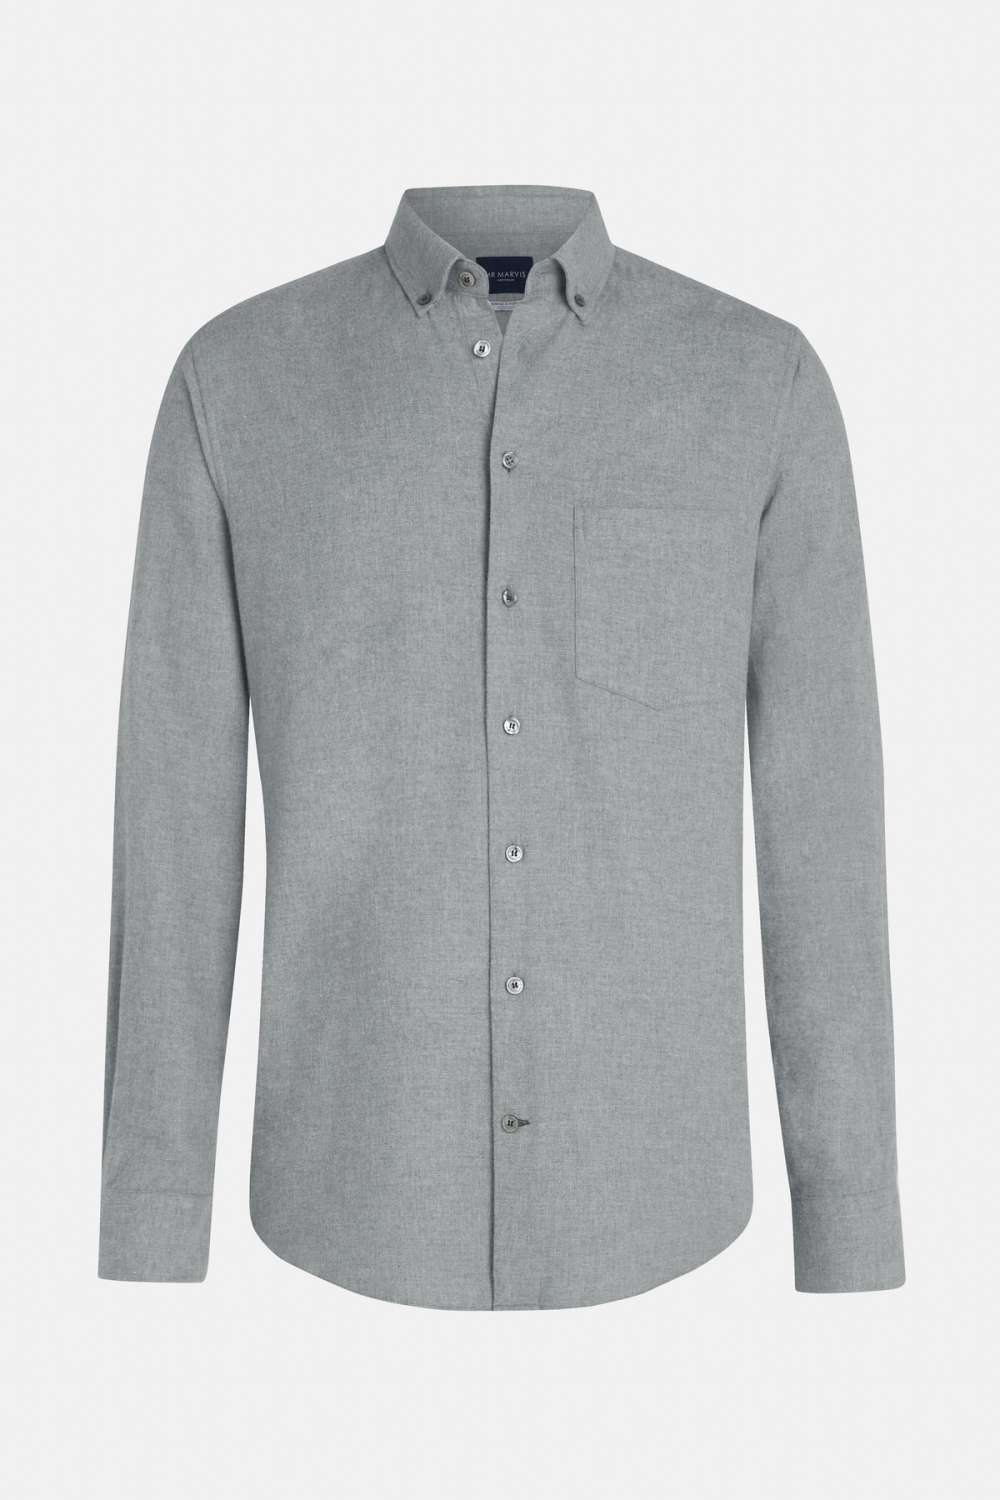 Oysters - La Camisa Flannel